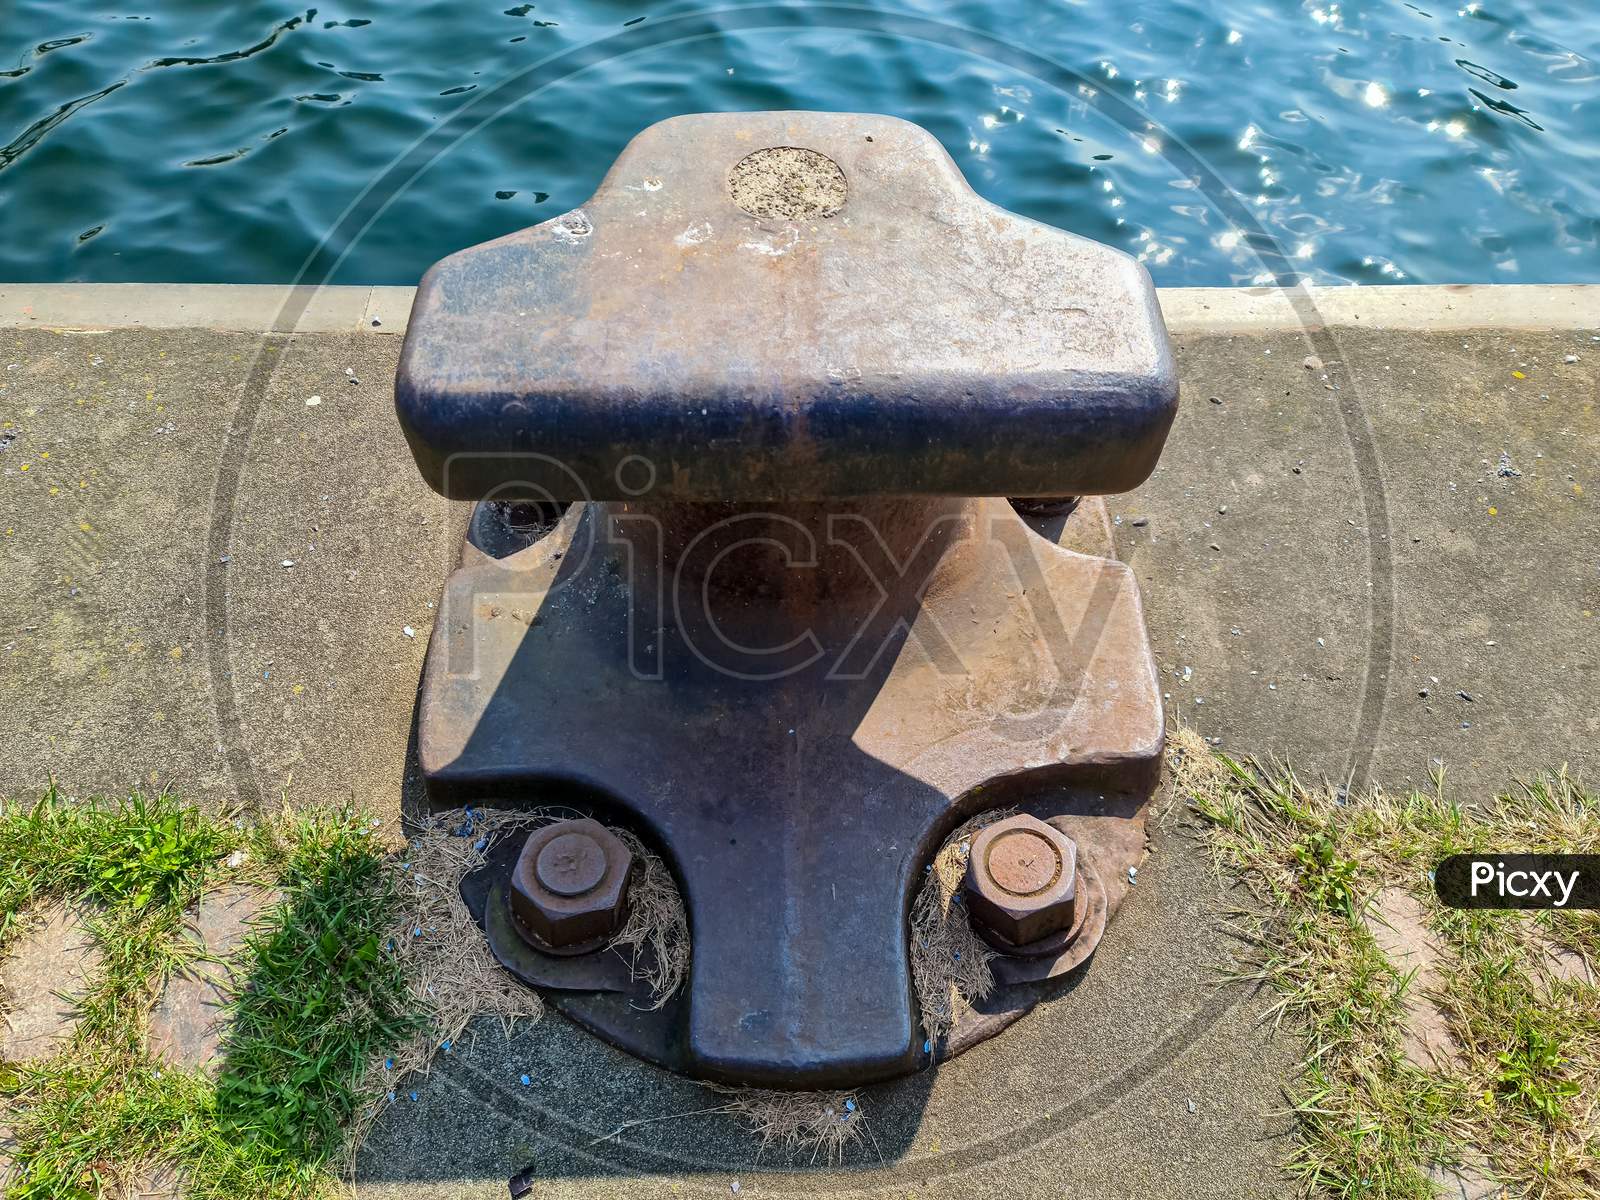 Different Bollards In Front Of The Water At The Port Of Kiel.